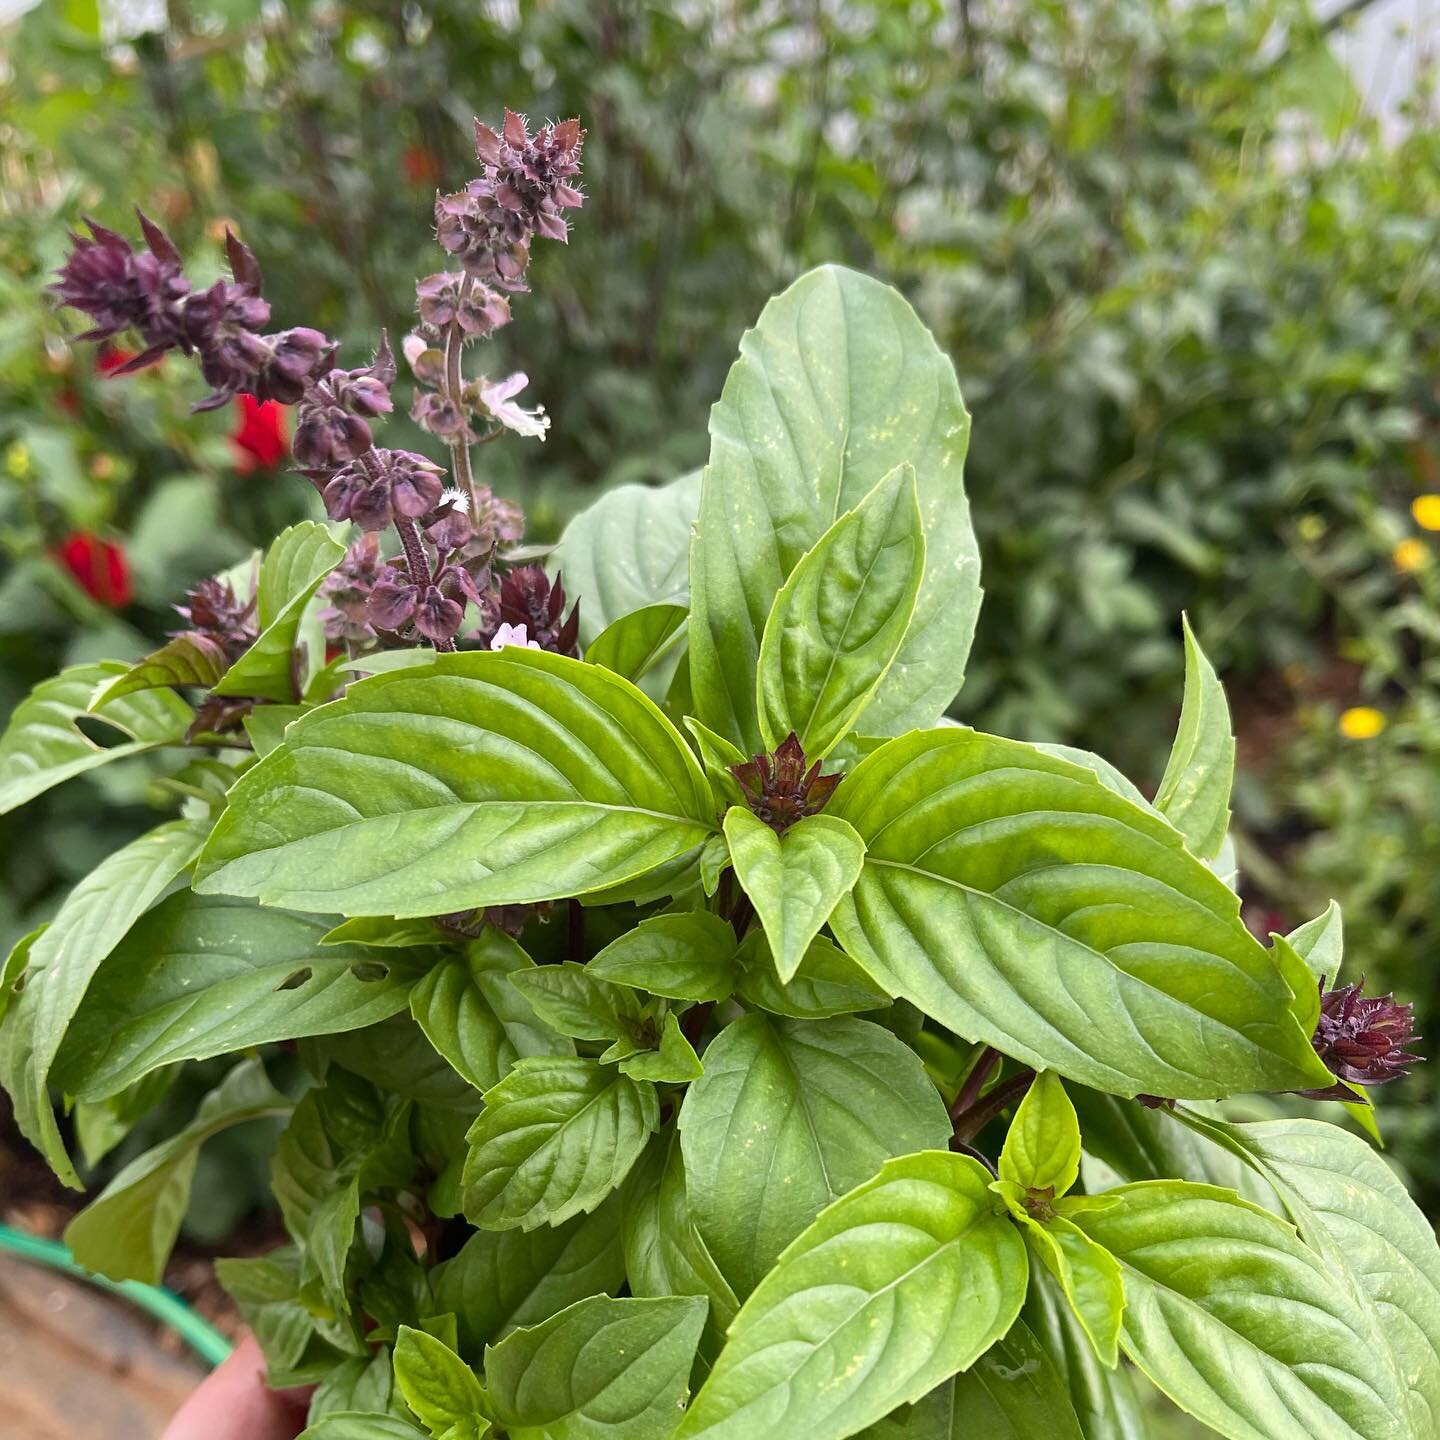 We get very excited when all the basil starts coming through, such a scrumptious smell in the tunnels. Cinnamon Basil is our absolute favourite! 🌿 
.
#moonacrefarm #biodynamicsmallholding #frome #somerset #herbs #freshherbs #biodynamic #love